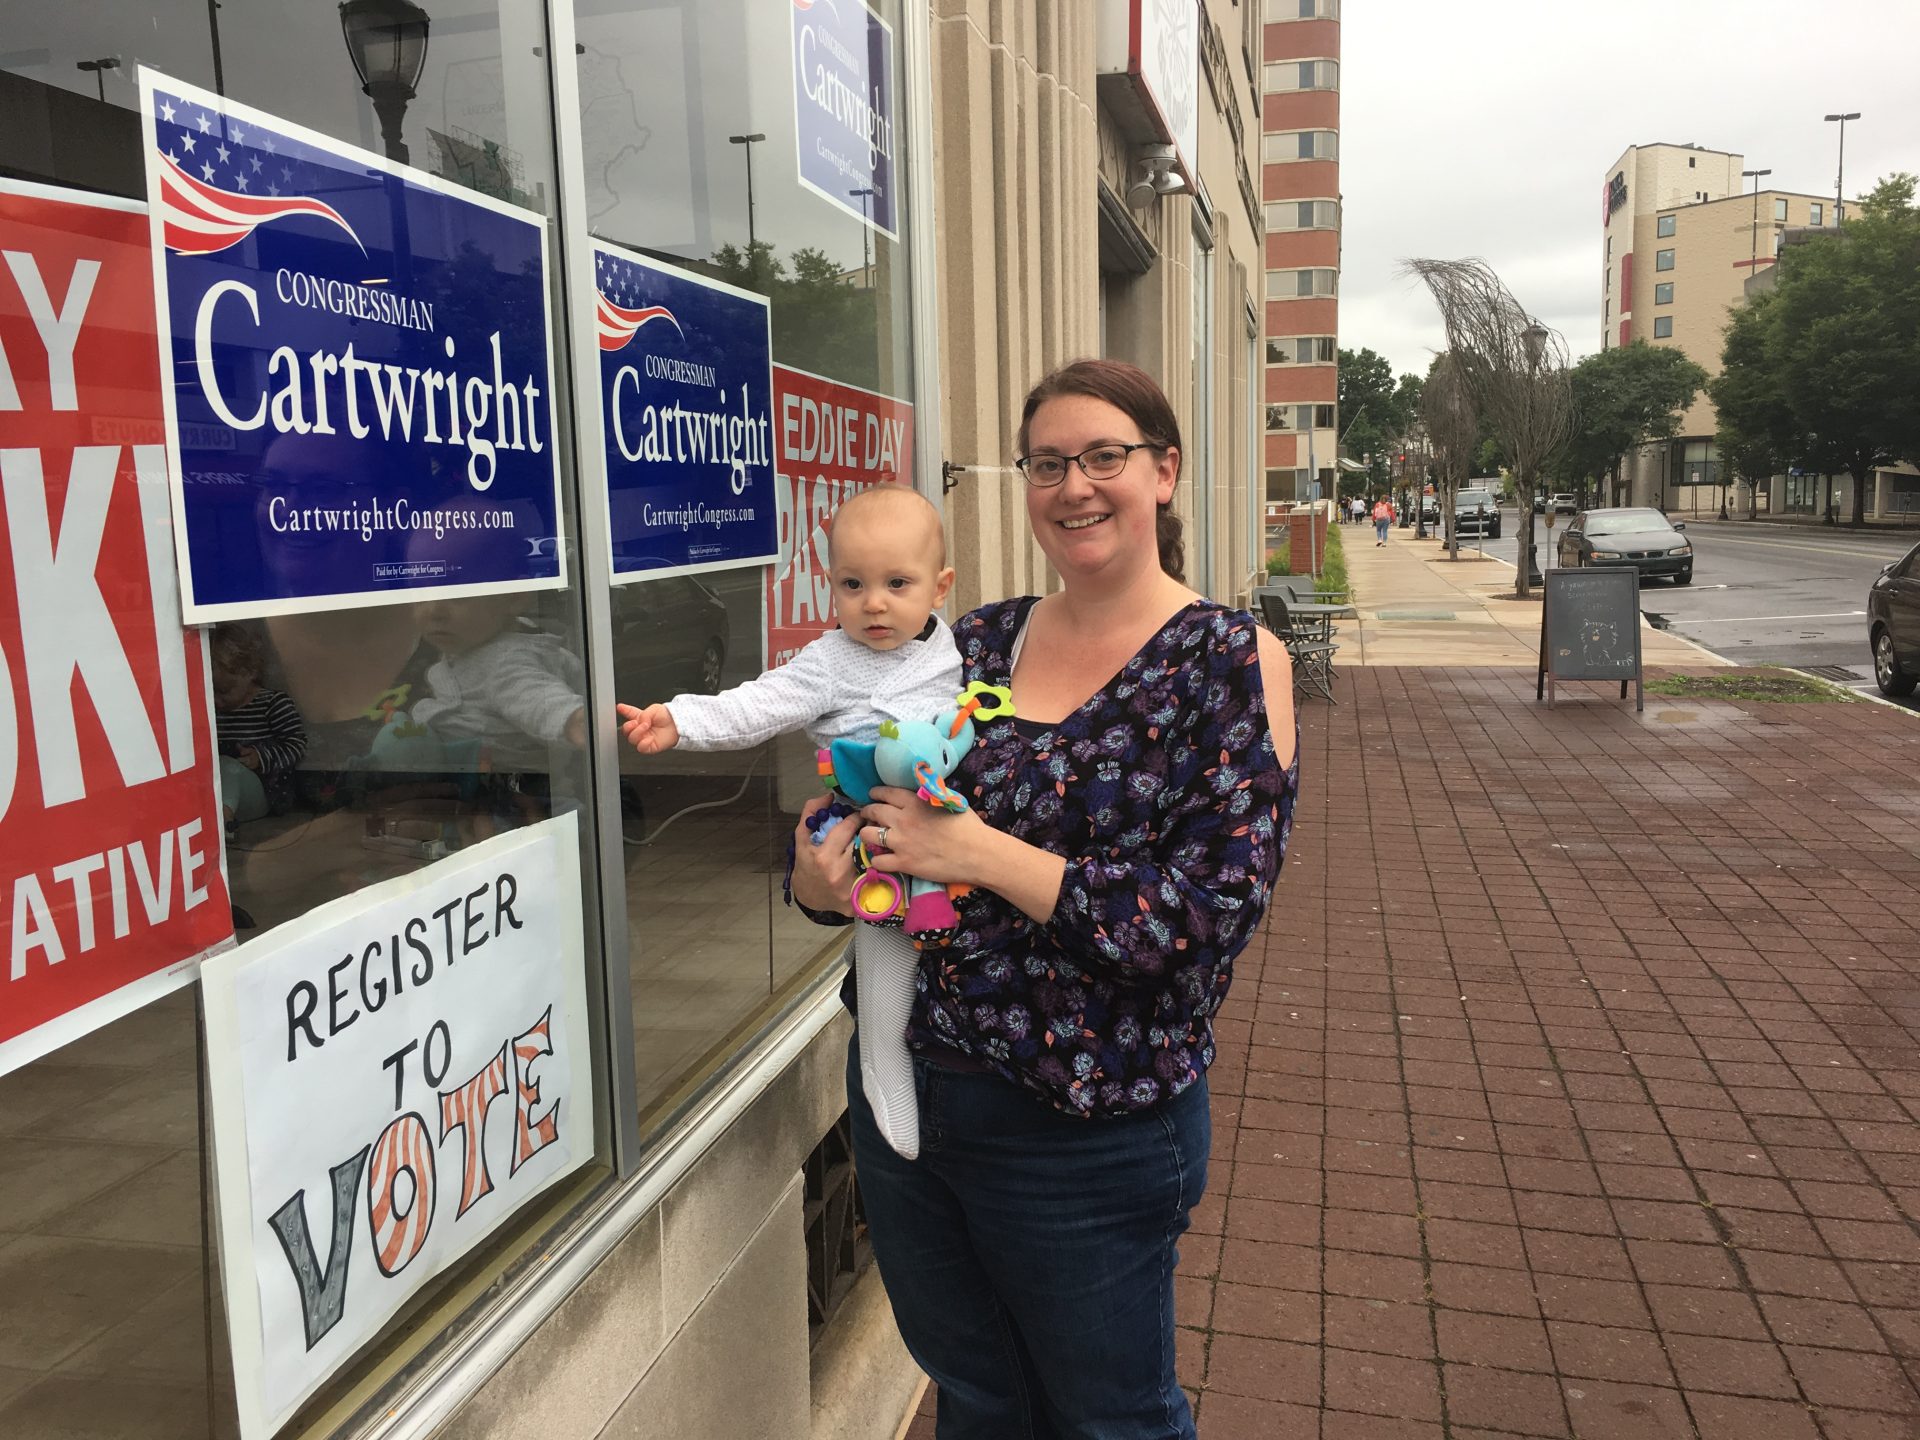 Democrat Alisha Hoffman-Mirilovich stands outside a campaign office in Wilkes-Barre on Sept. 12, 2018, while holding her son.